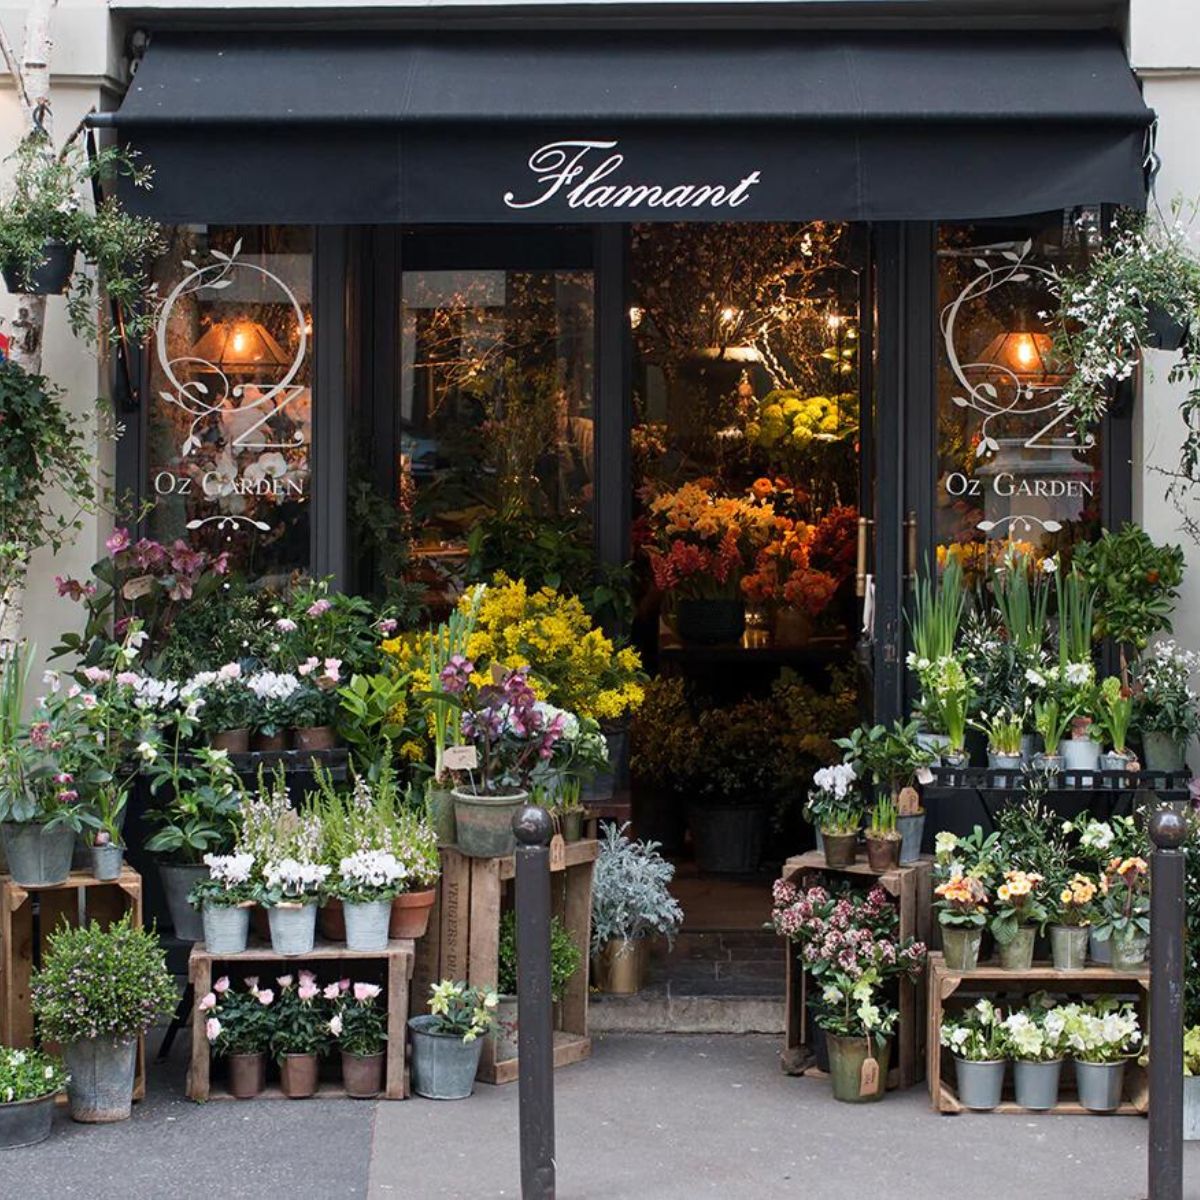 Beautiful outside of floral shop to pick your own flowers on Thursd